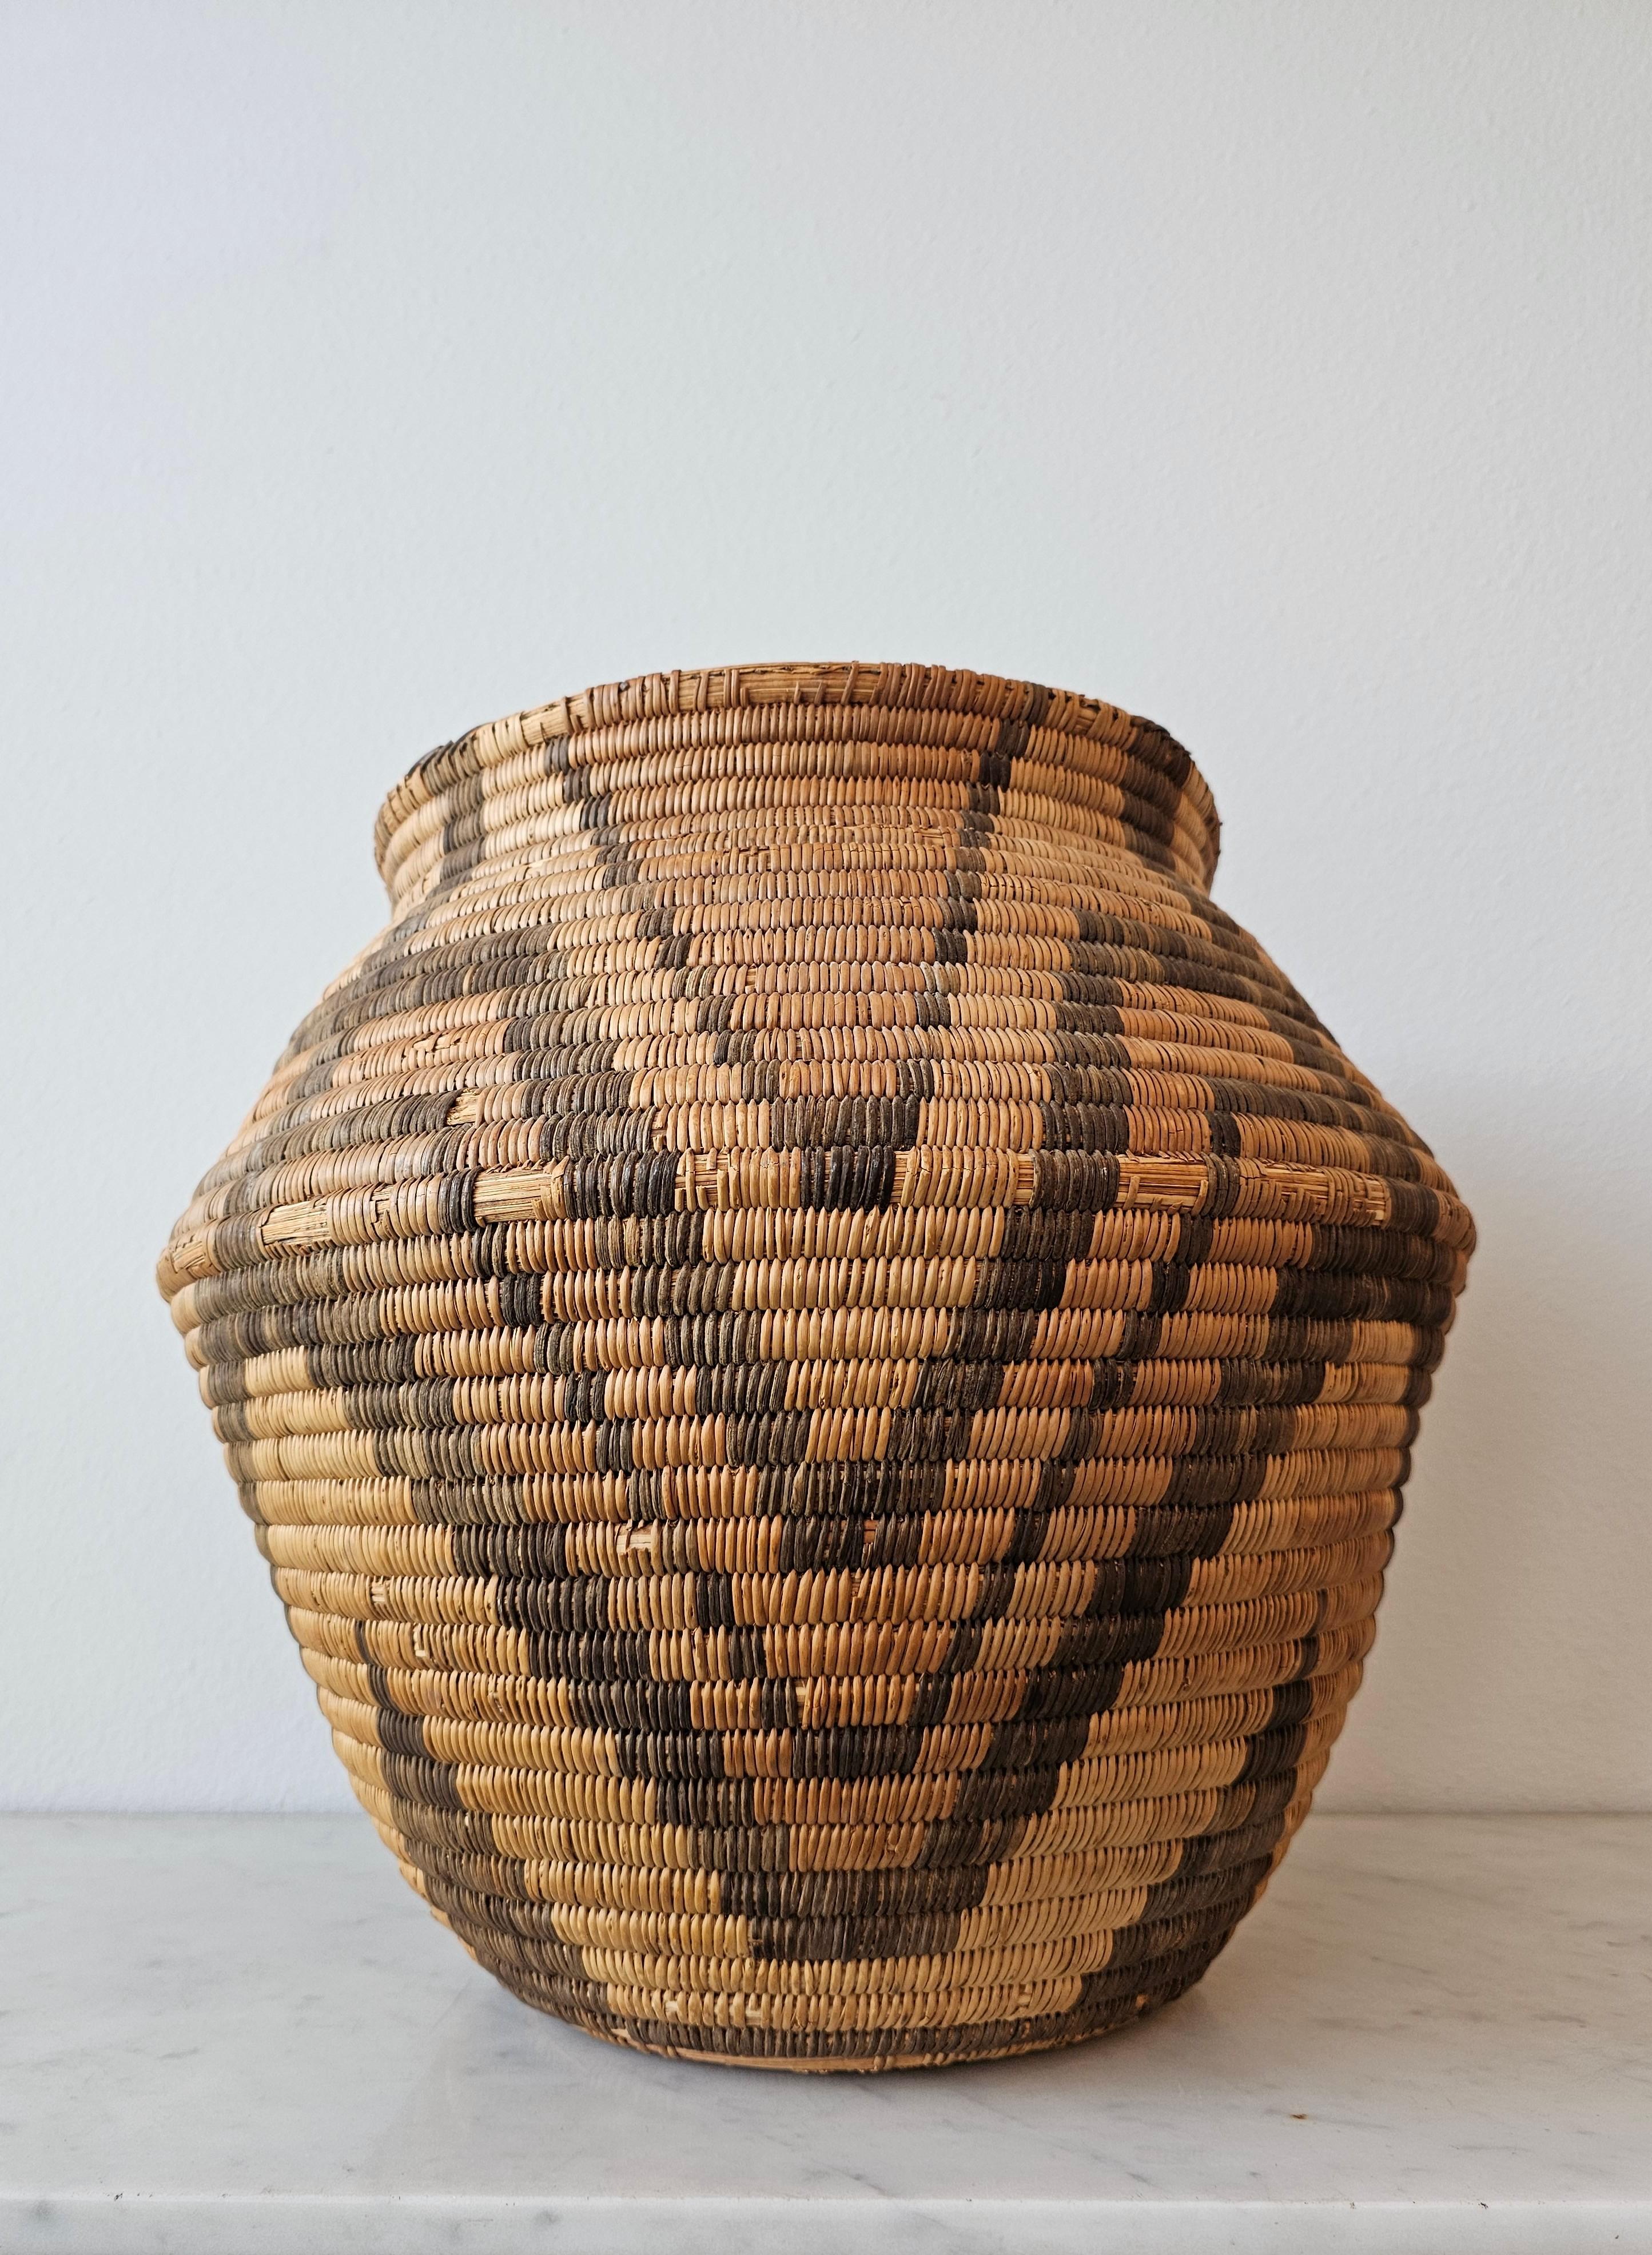 Antique Apache Olla Jar Coiled Willow Wicker Devil's Claw Basket  For Sale 8